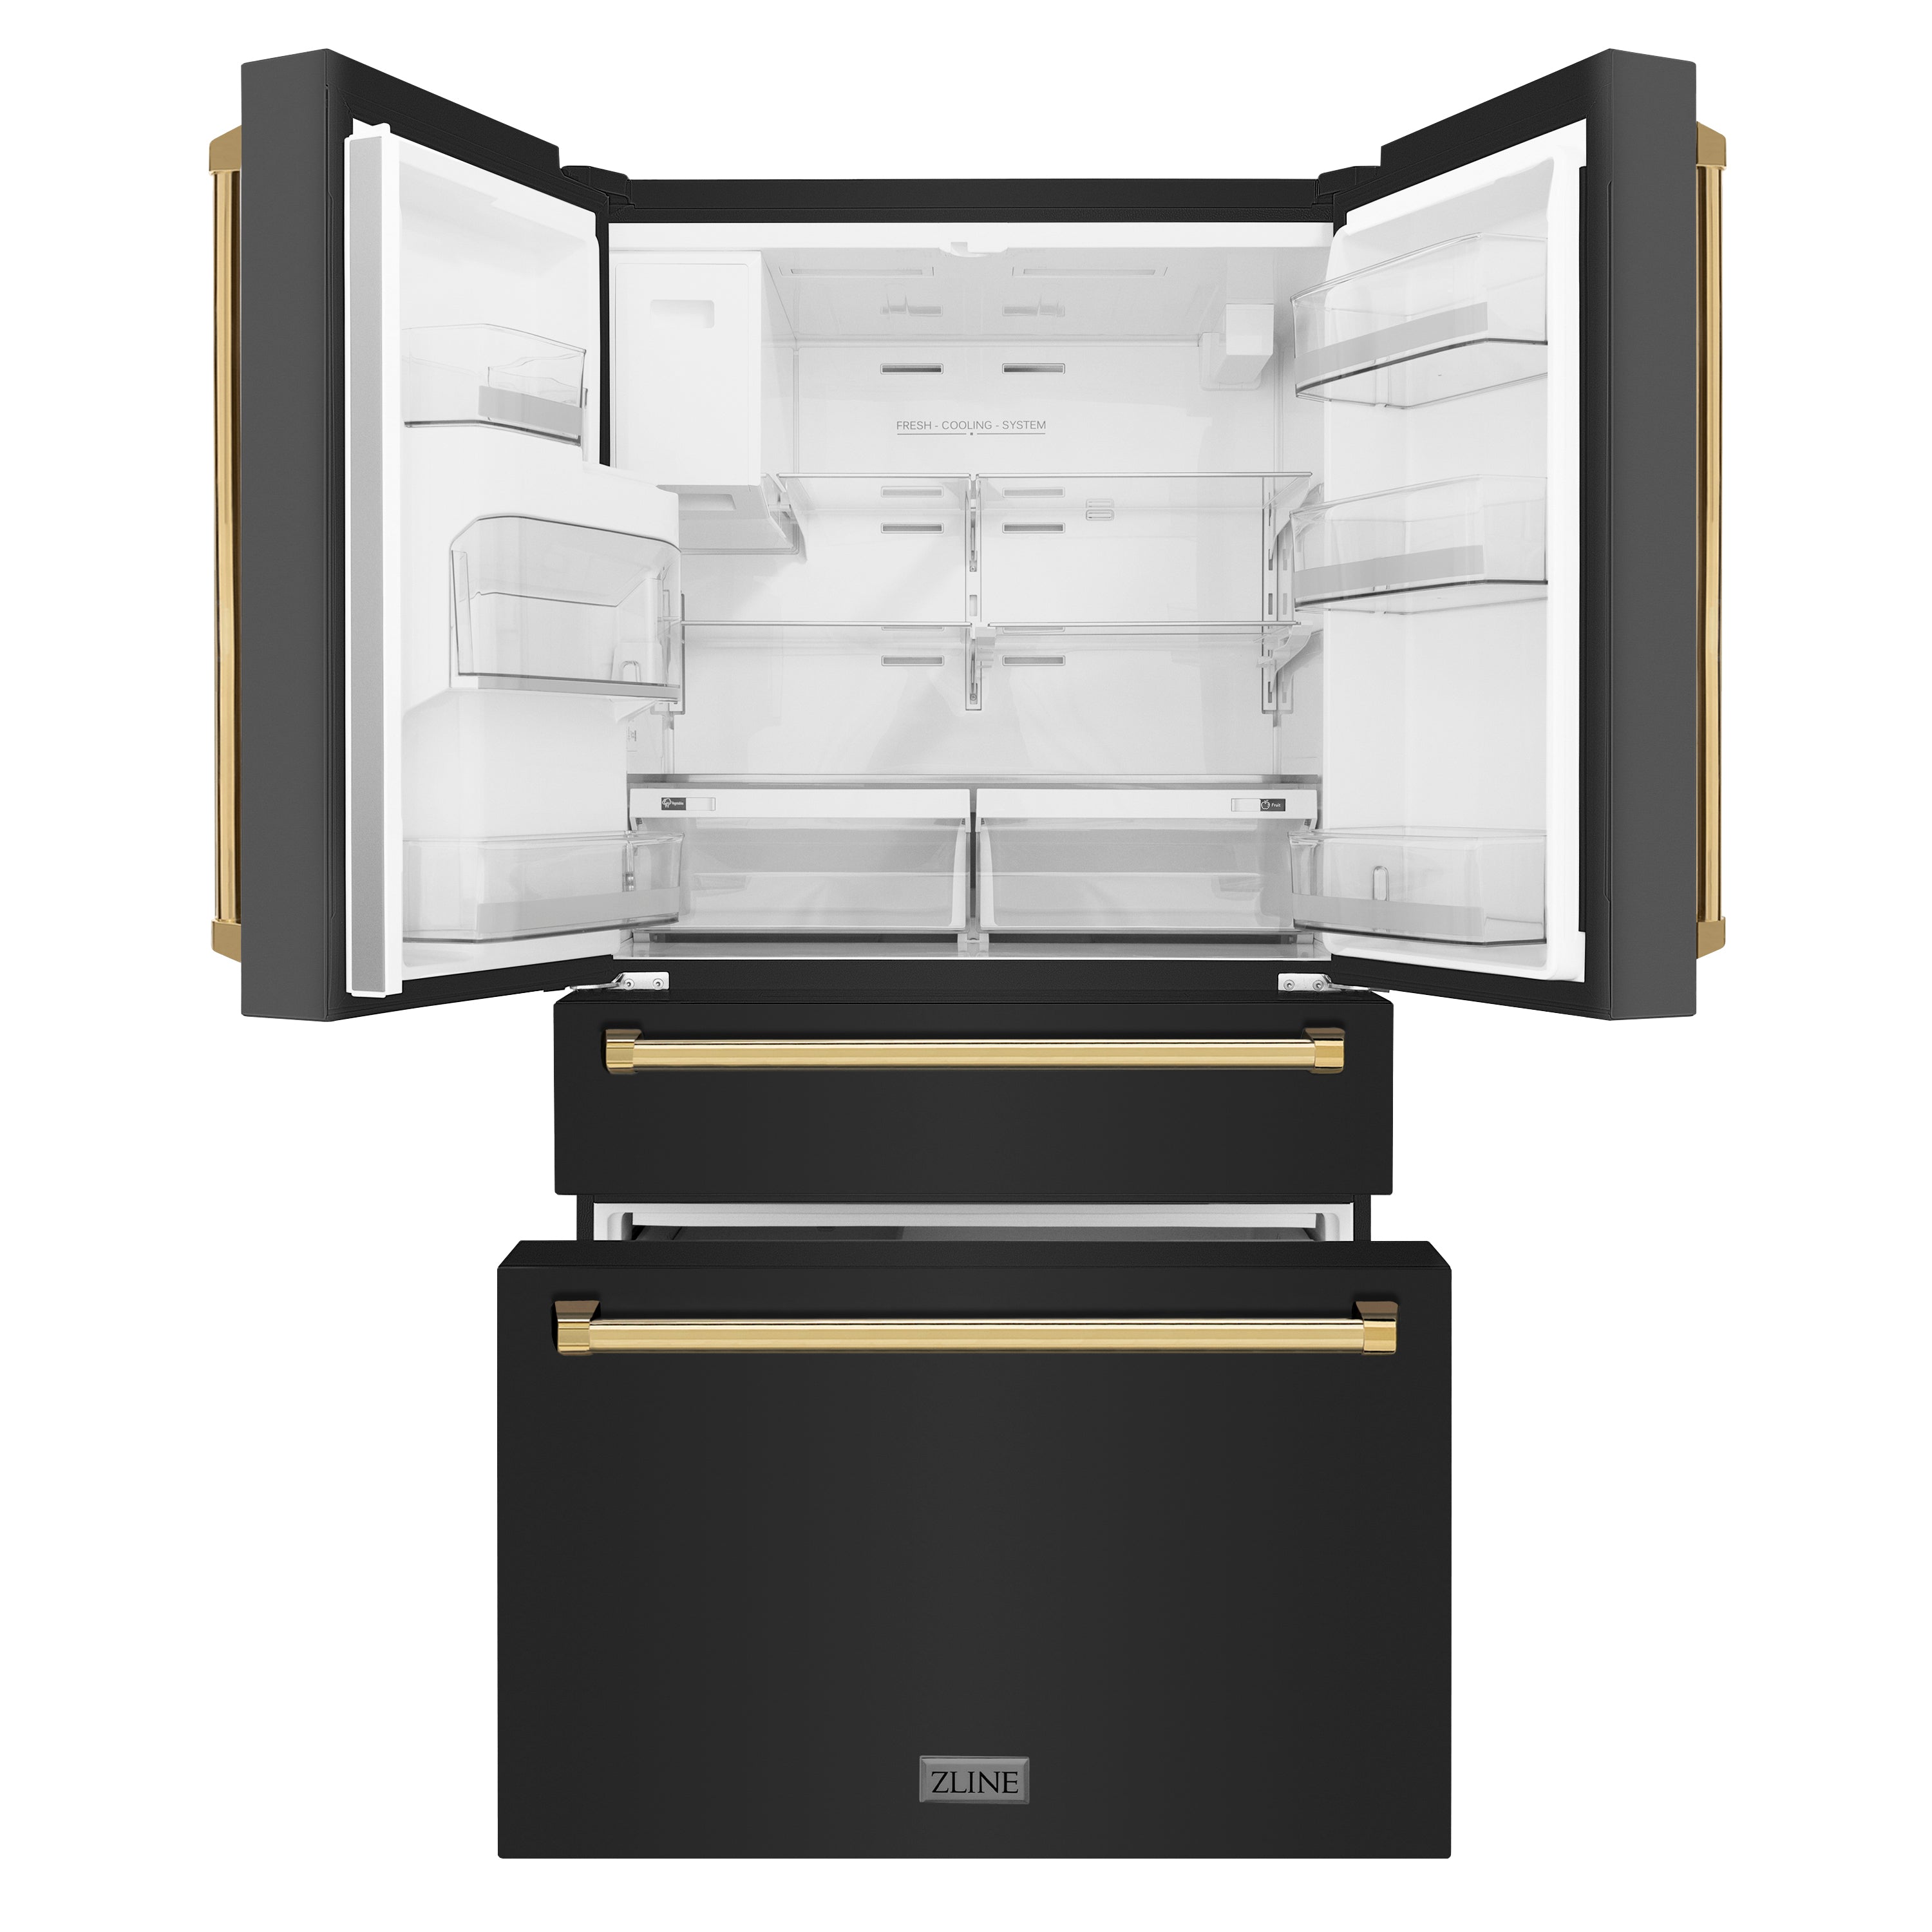 ZLINE 36" Autograph Edition 21.6 cu. ft 4-Door French Door Refrigerator with Water and Ice Dispenser in Fingerprint Resistant Black Stainless Steel with Polished Gold Handles (RFMZ-W-36-BS-G)